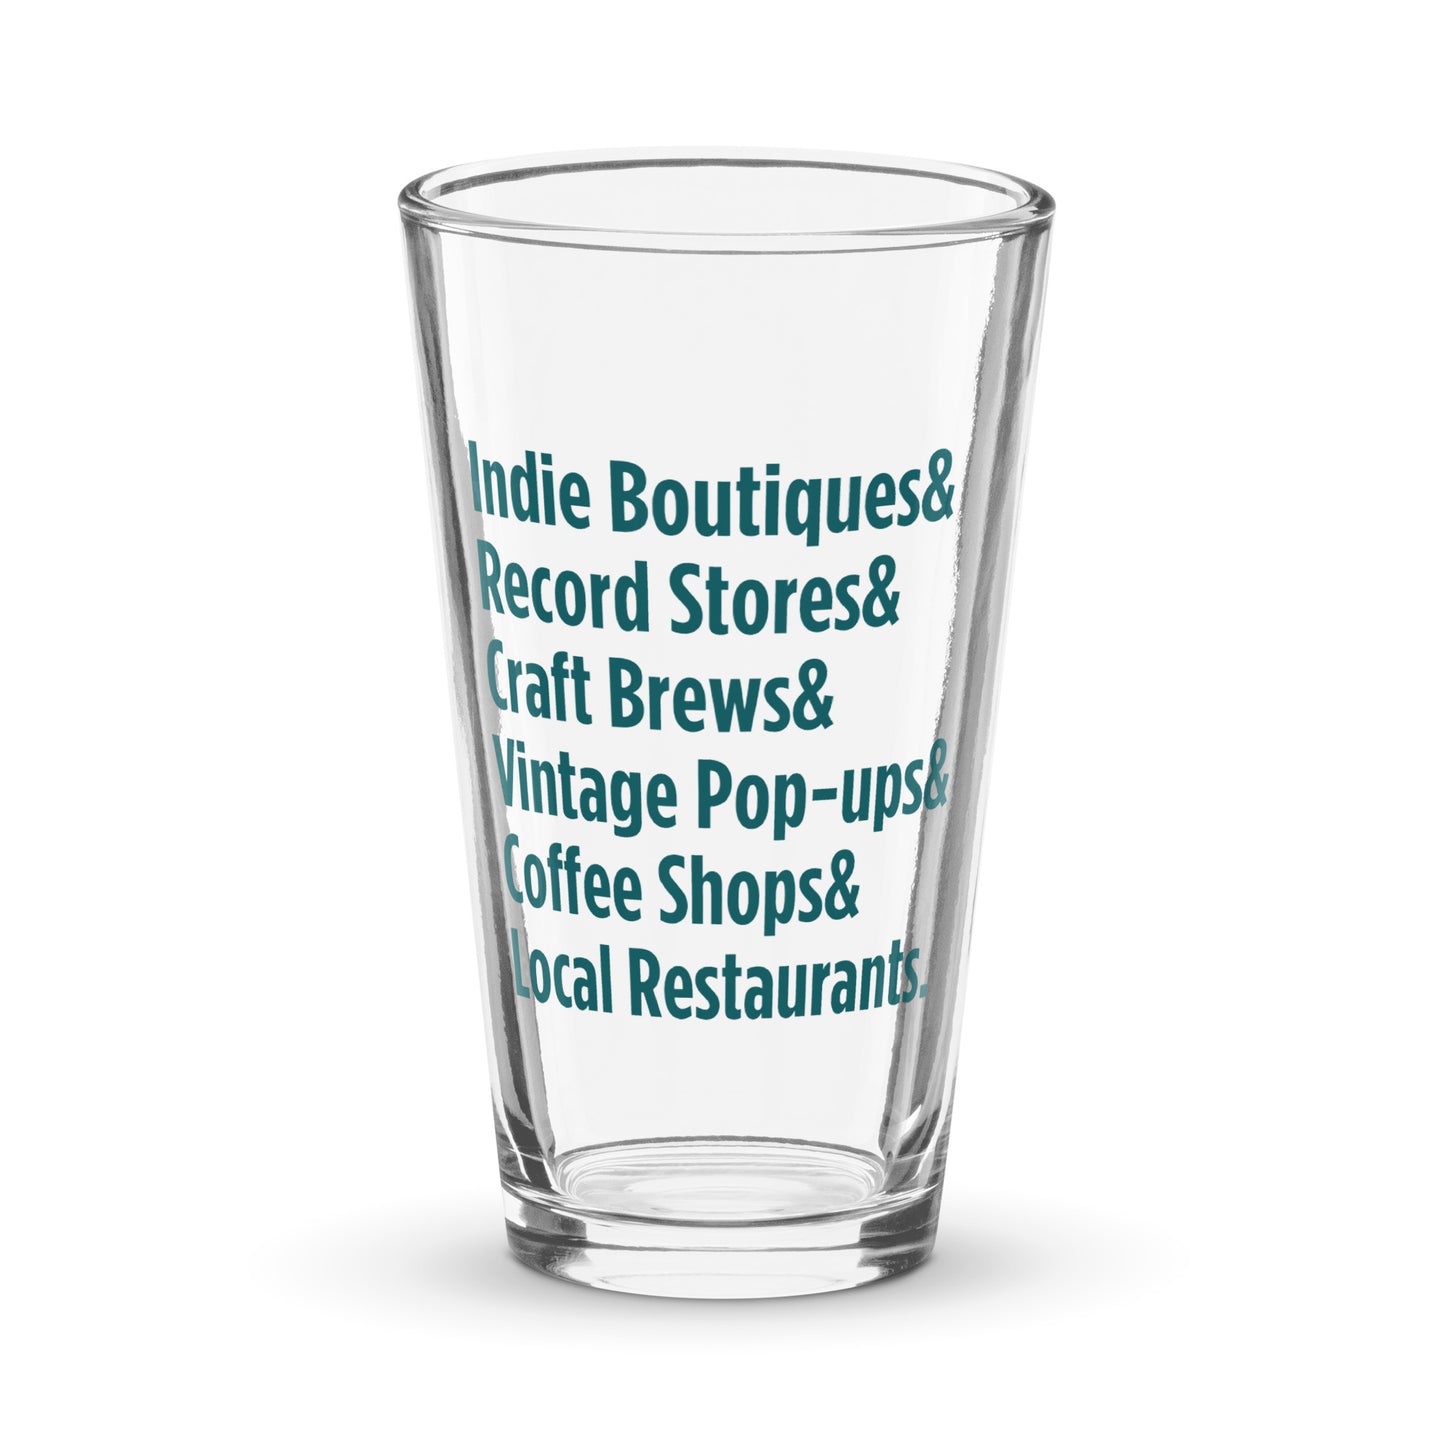 "Only on Main Street" (Local Businesses) Shaker Pint Glass